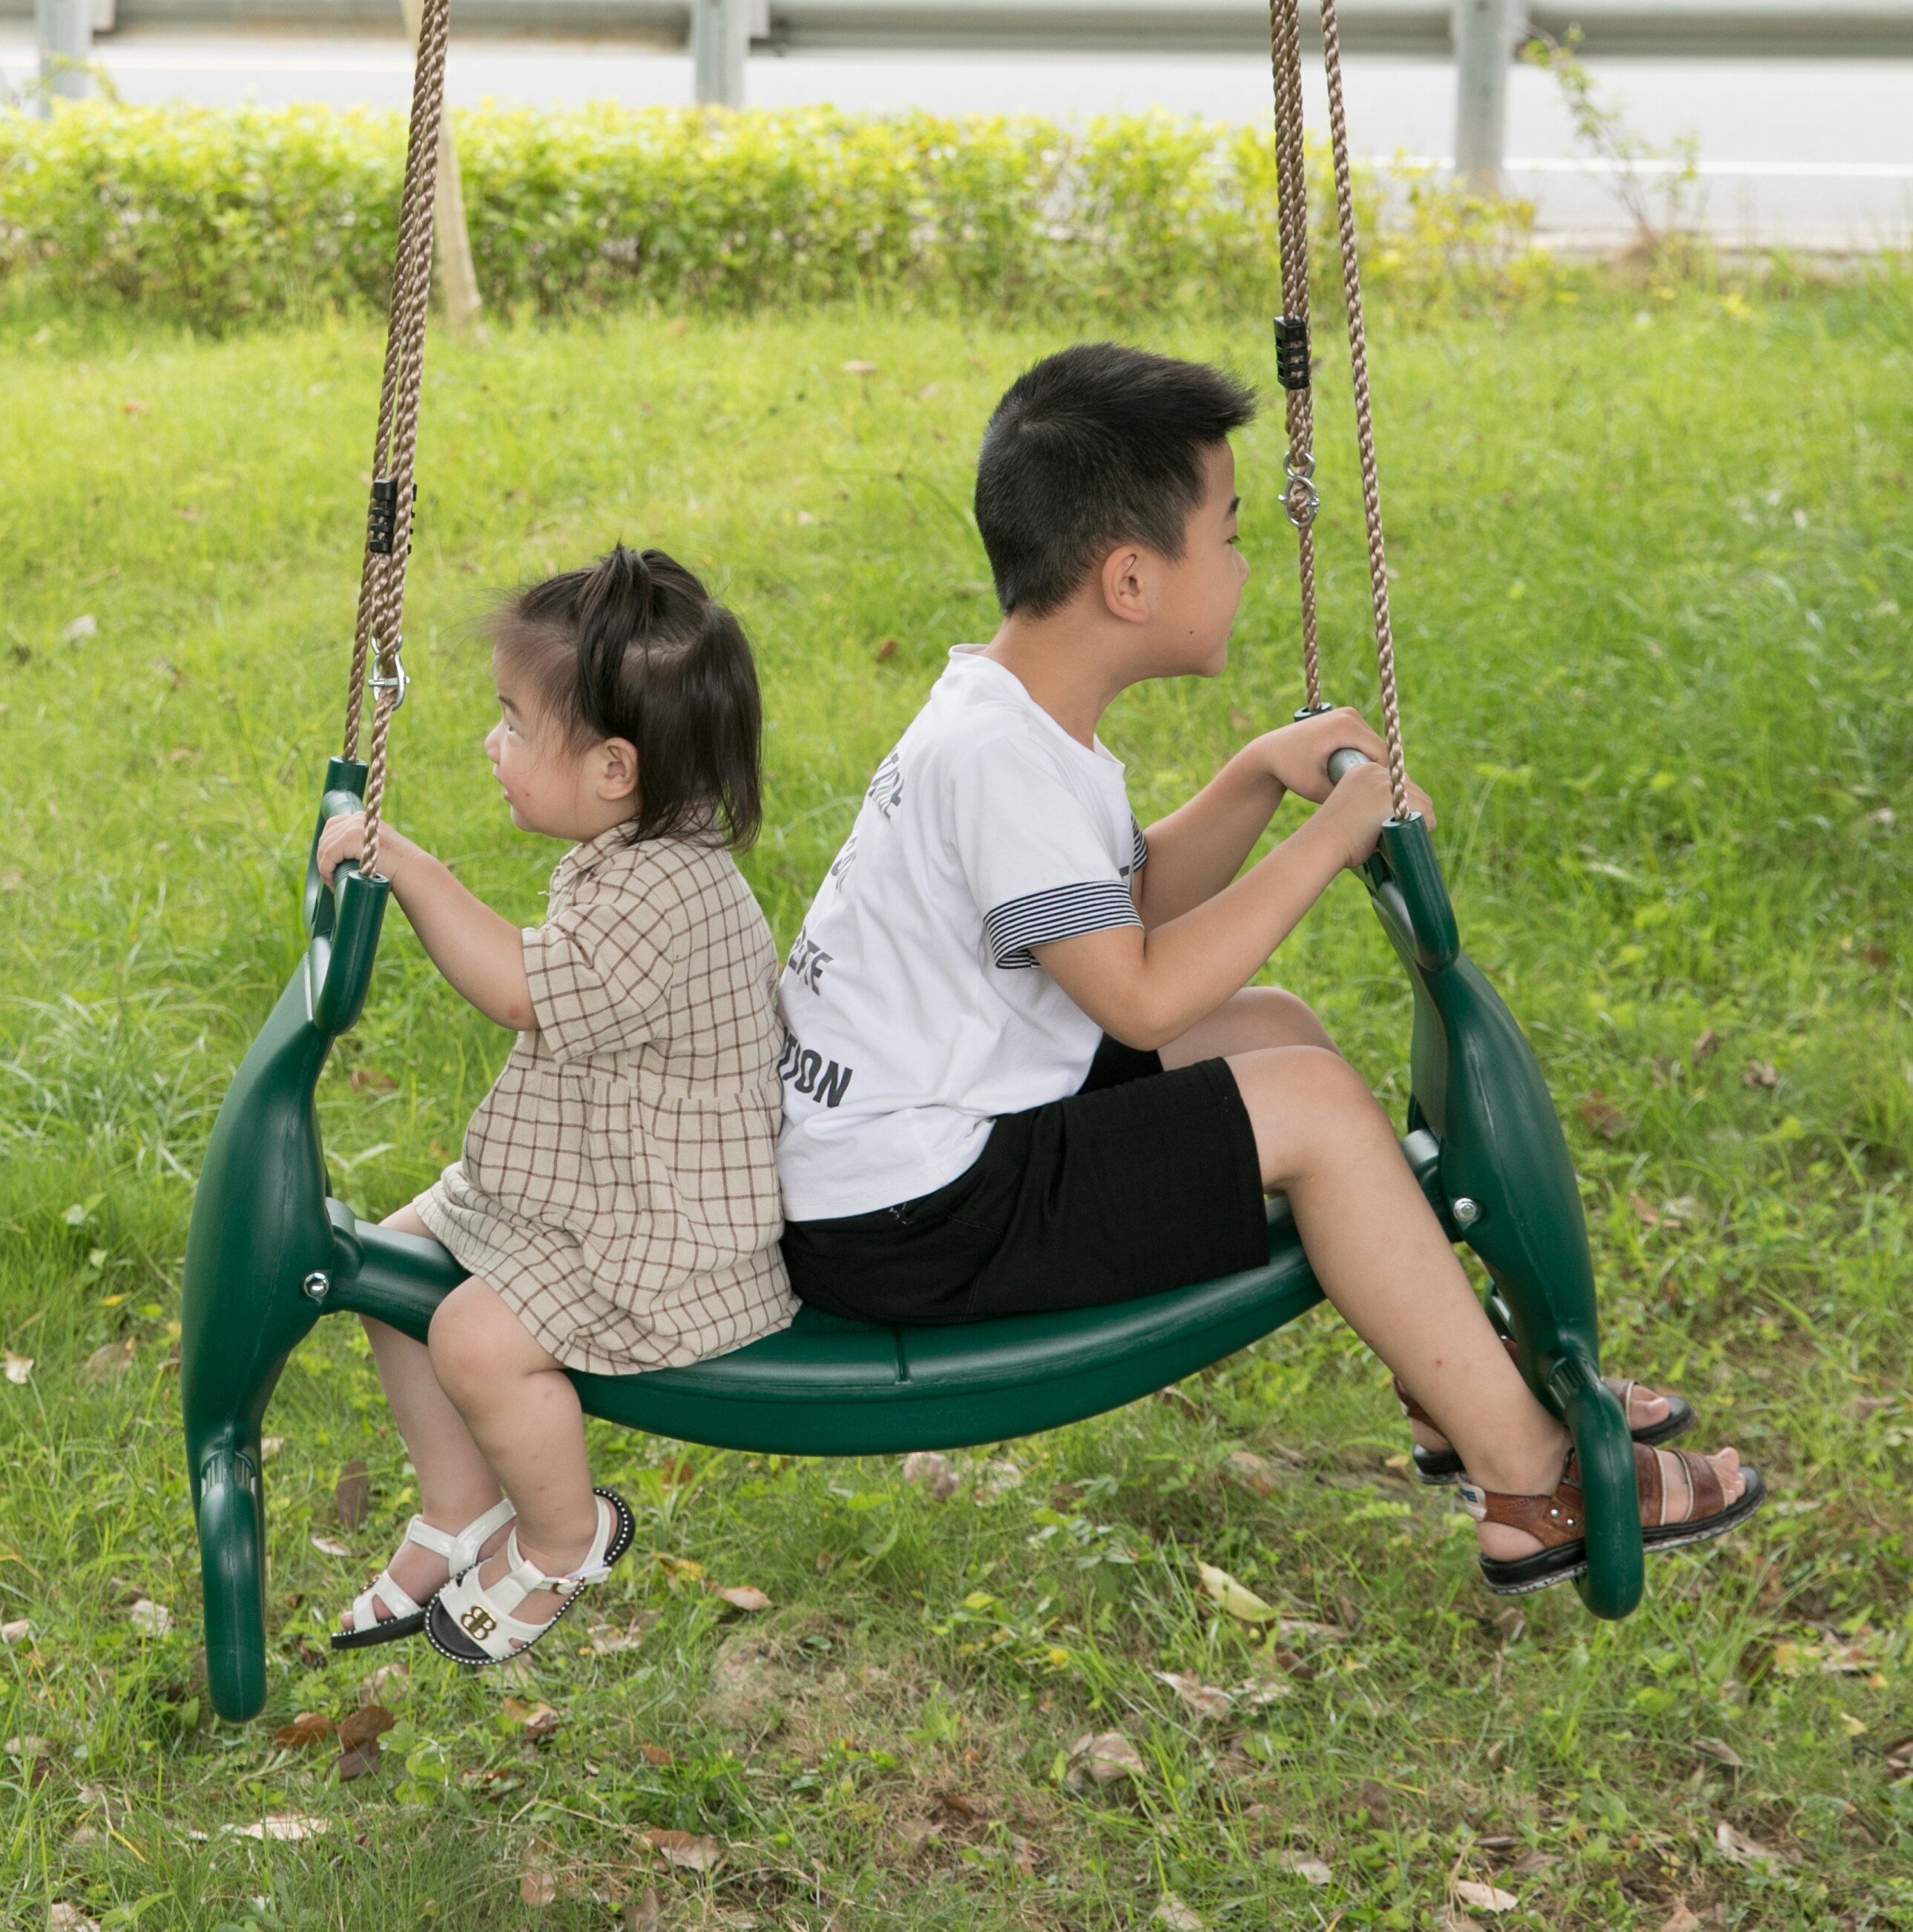 with Fully Coated ChaiYellow PLAYKIDS SwingSet Glider Swing Glider Horse glider 